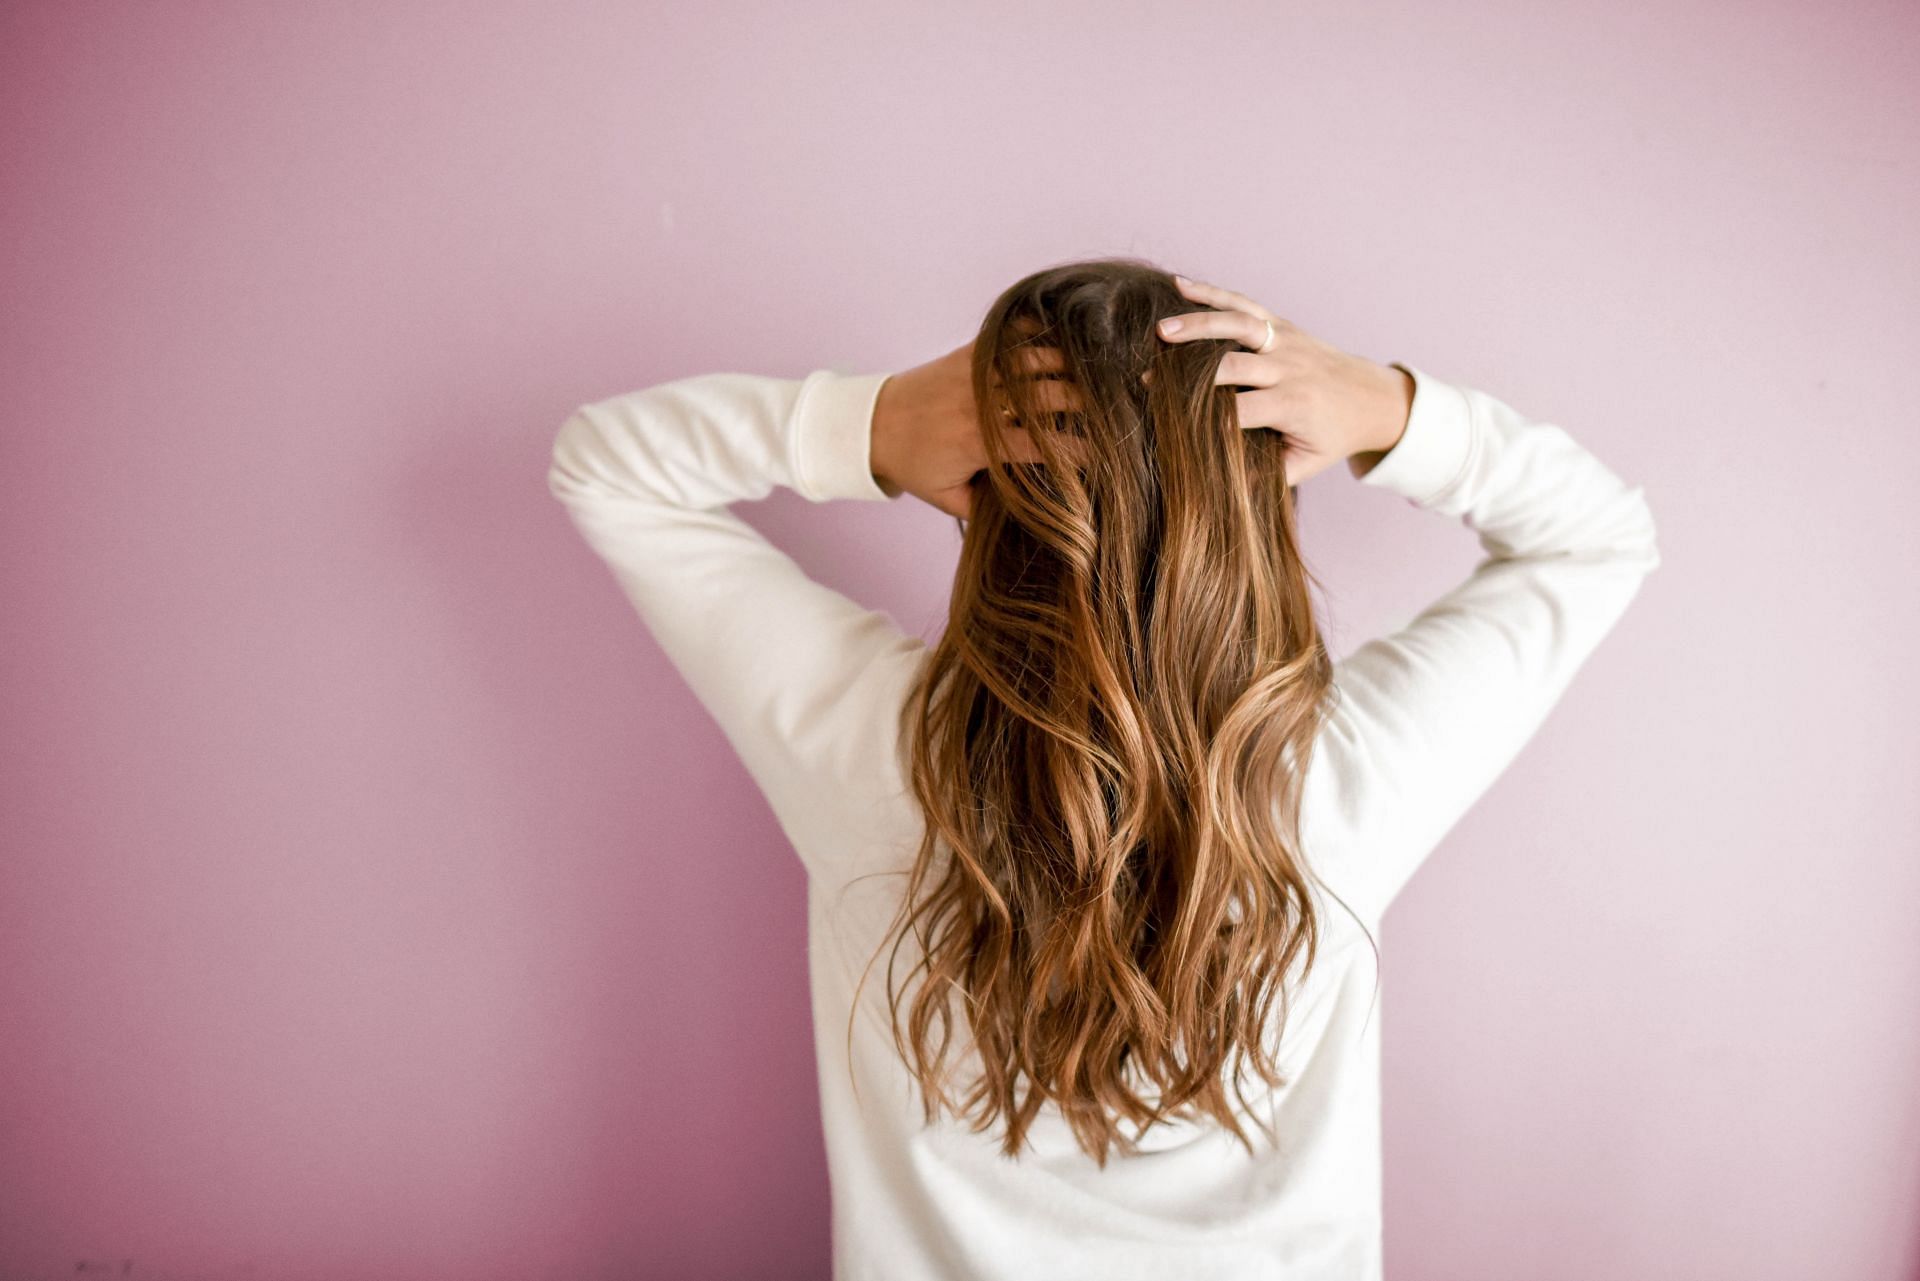 Yoga for hair growth can help you improve your hair and scalp health (Image via Pexels @Element Digital)